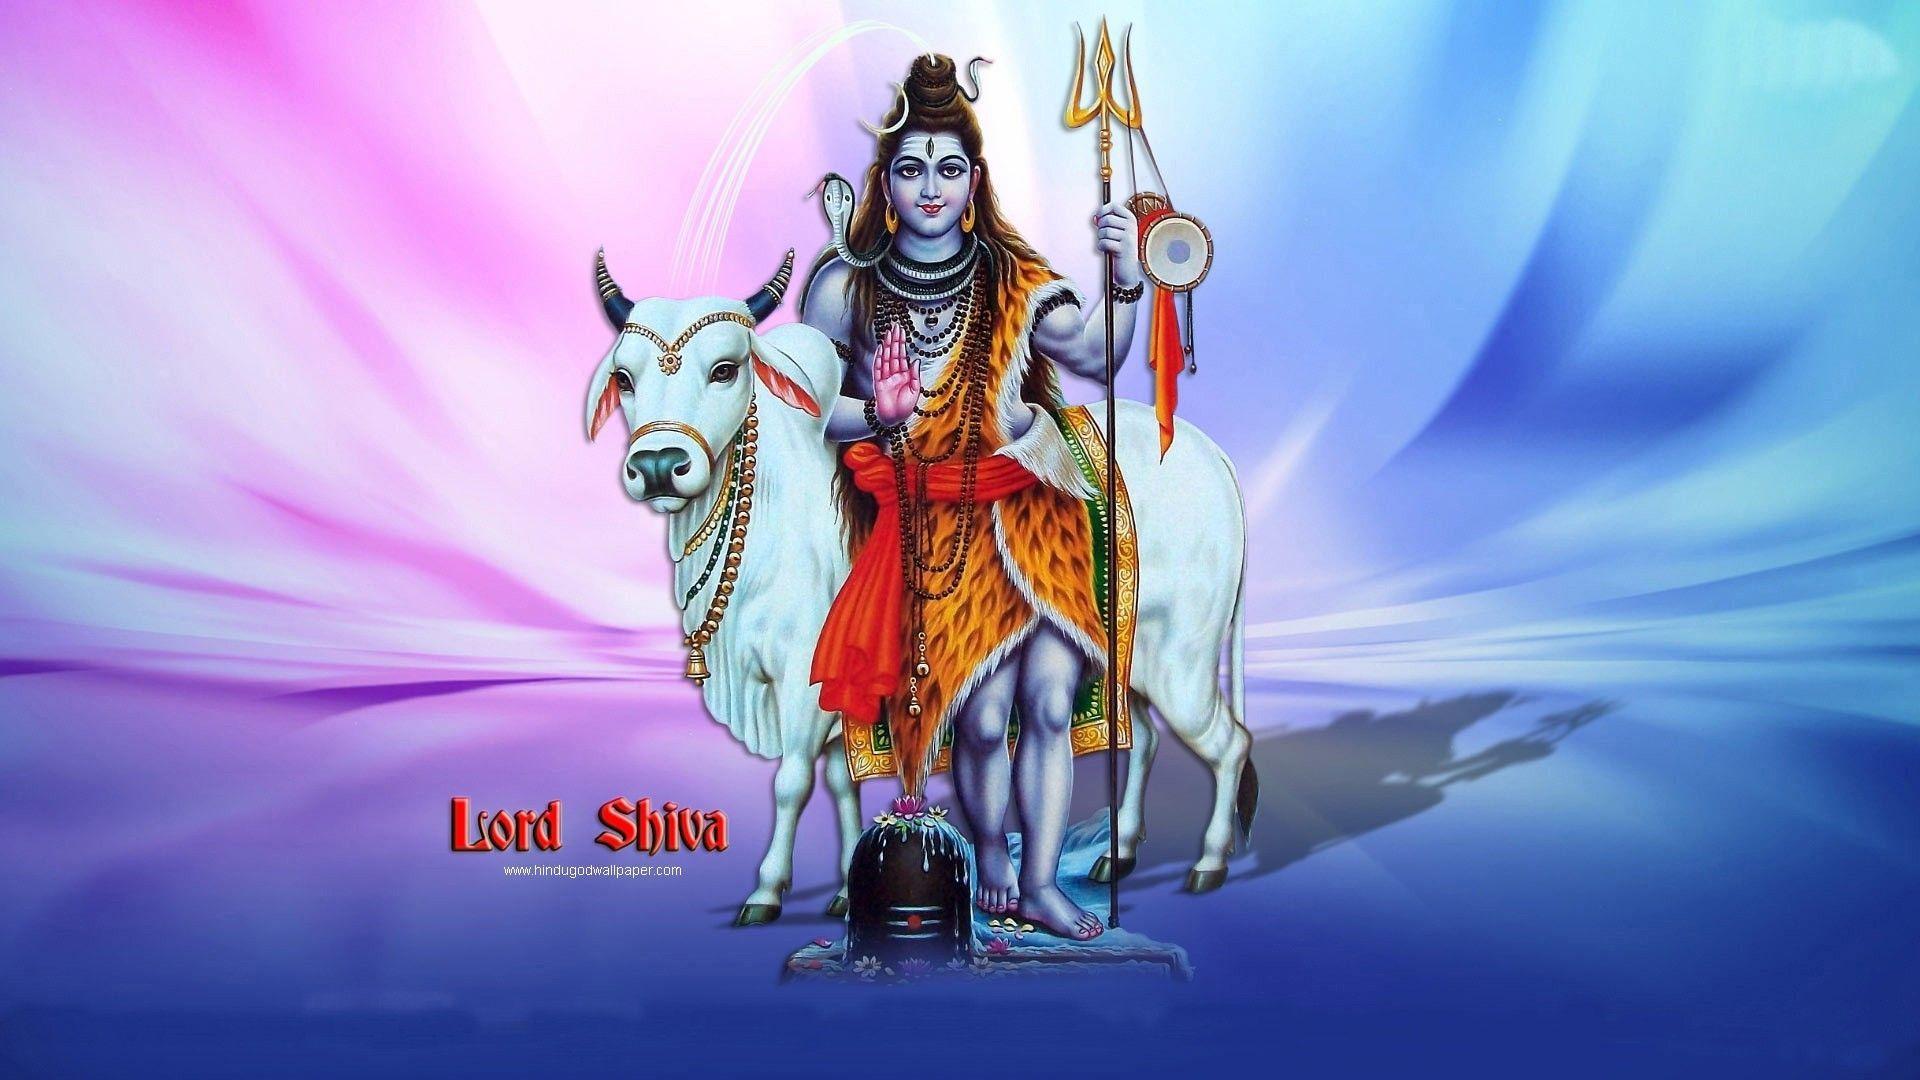 SHIVA HD WALLPAPERS, 1080P PICTURES, IMAGES HD. Lord